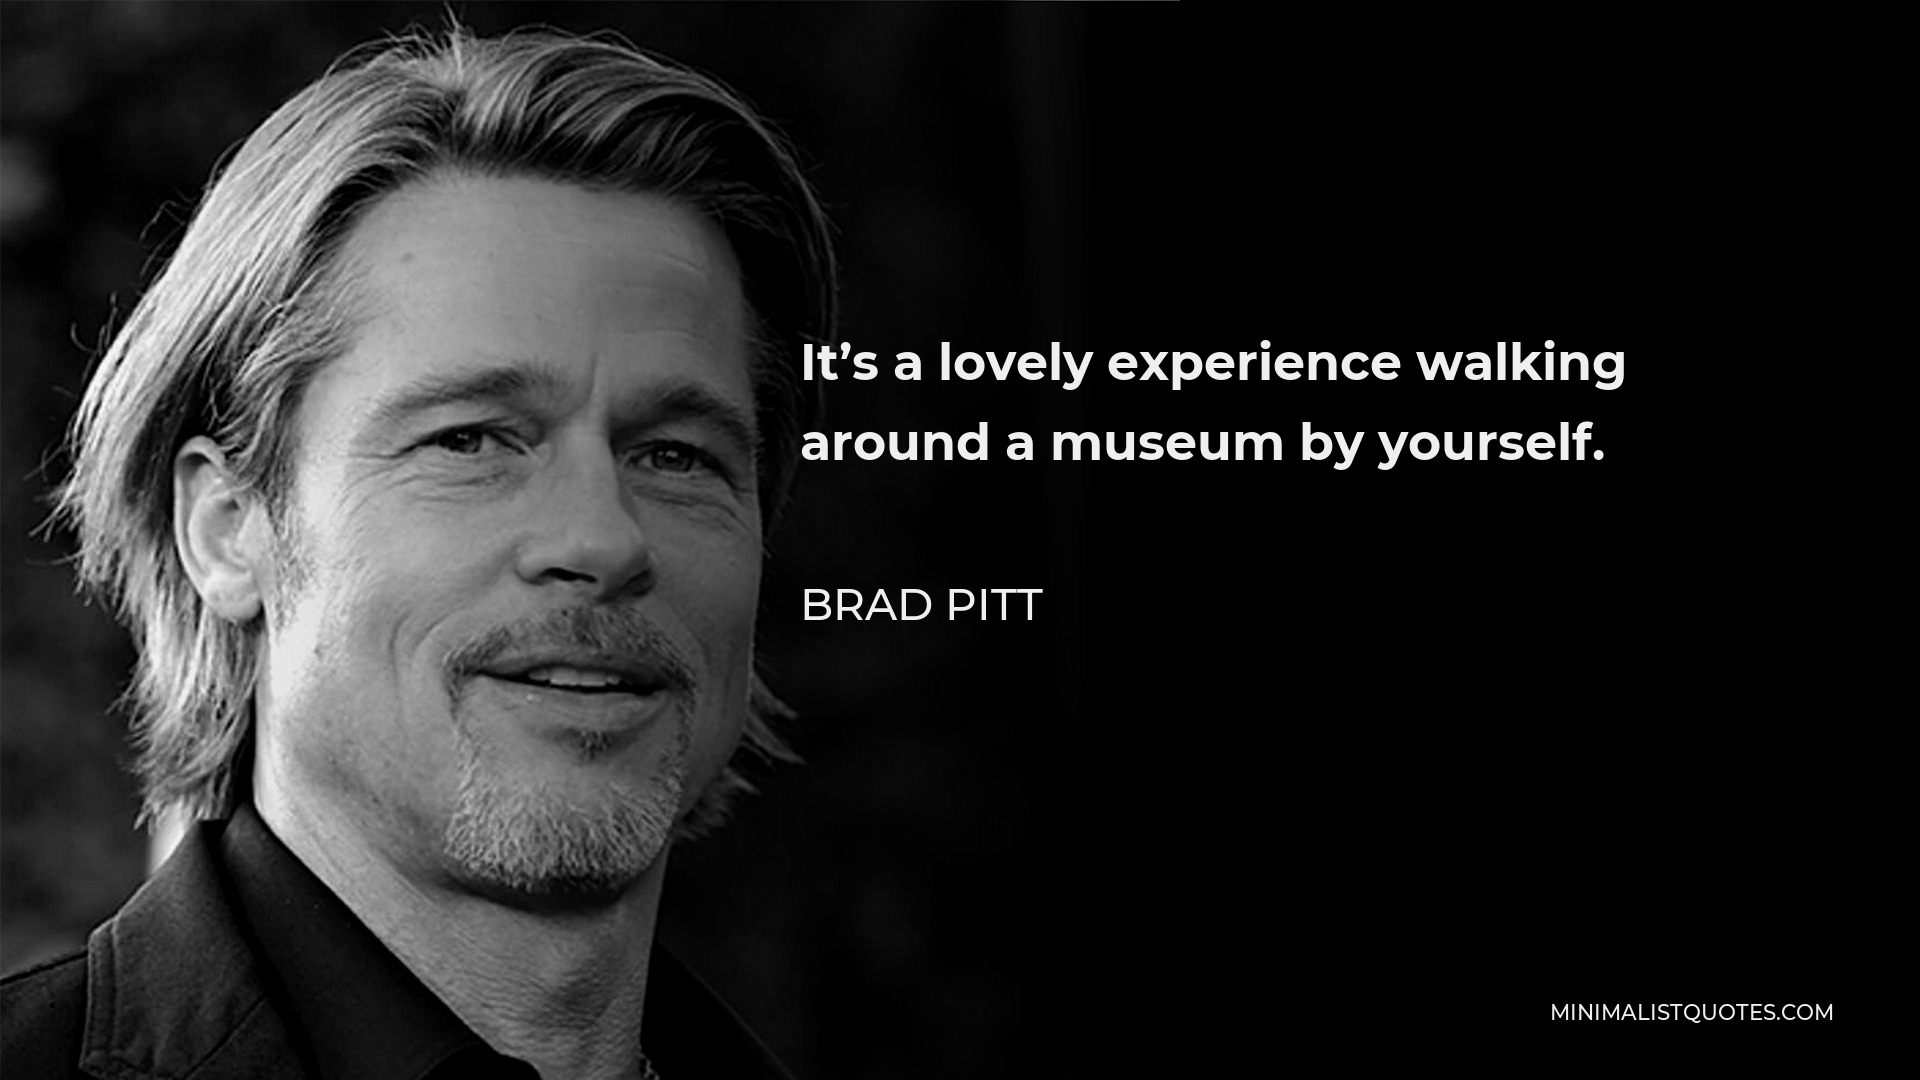 Brad Pitt Quote - It’s a lovely experience walking around a museum by yourself.